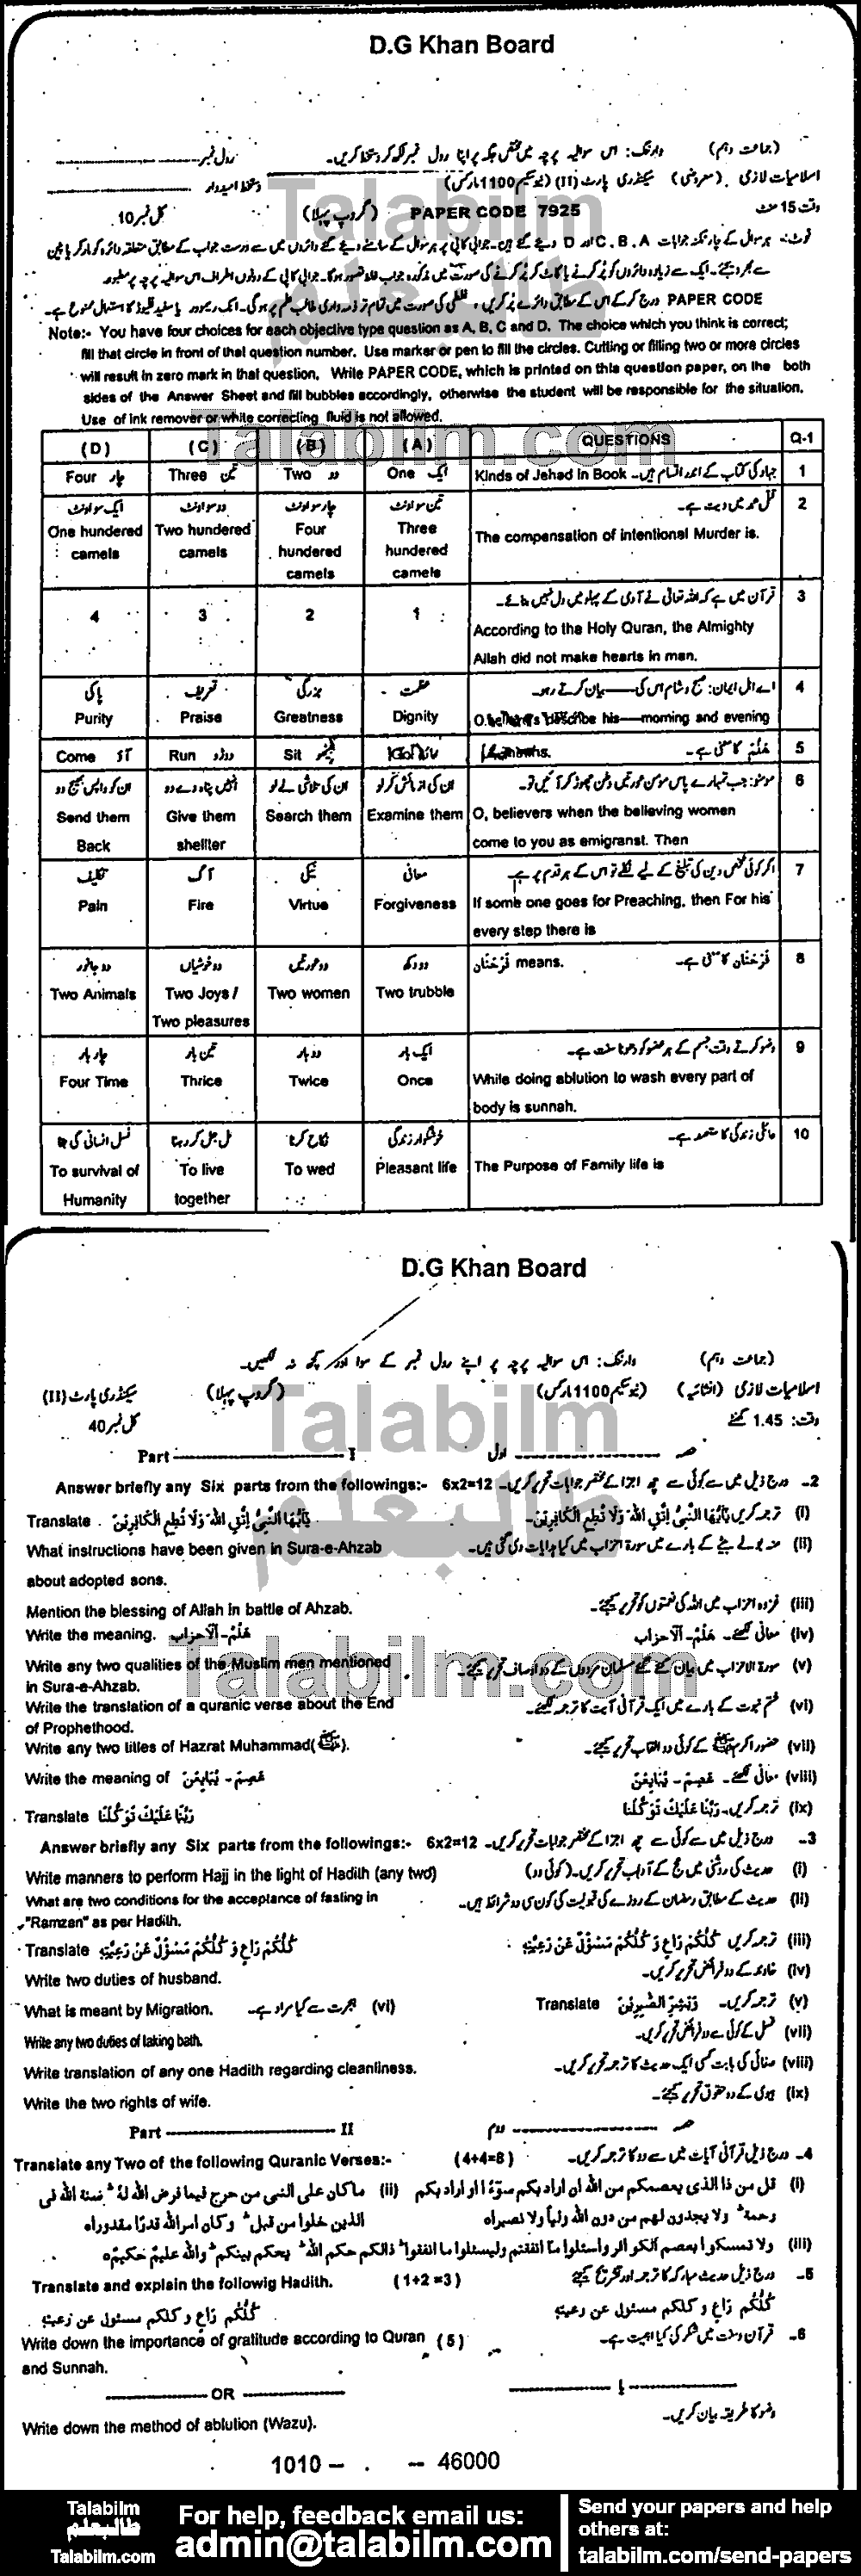 Islamiat Compulsory 0 past paper for 2016 Group-I